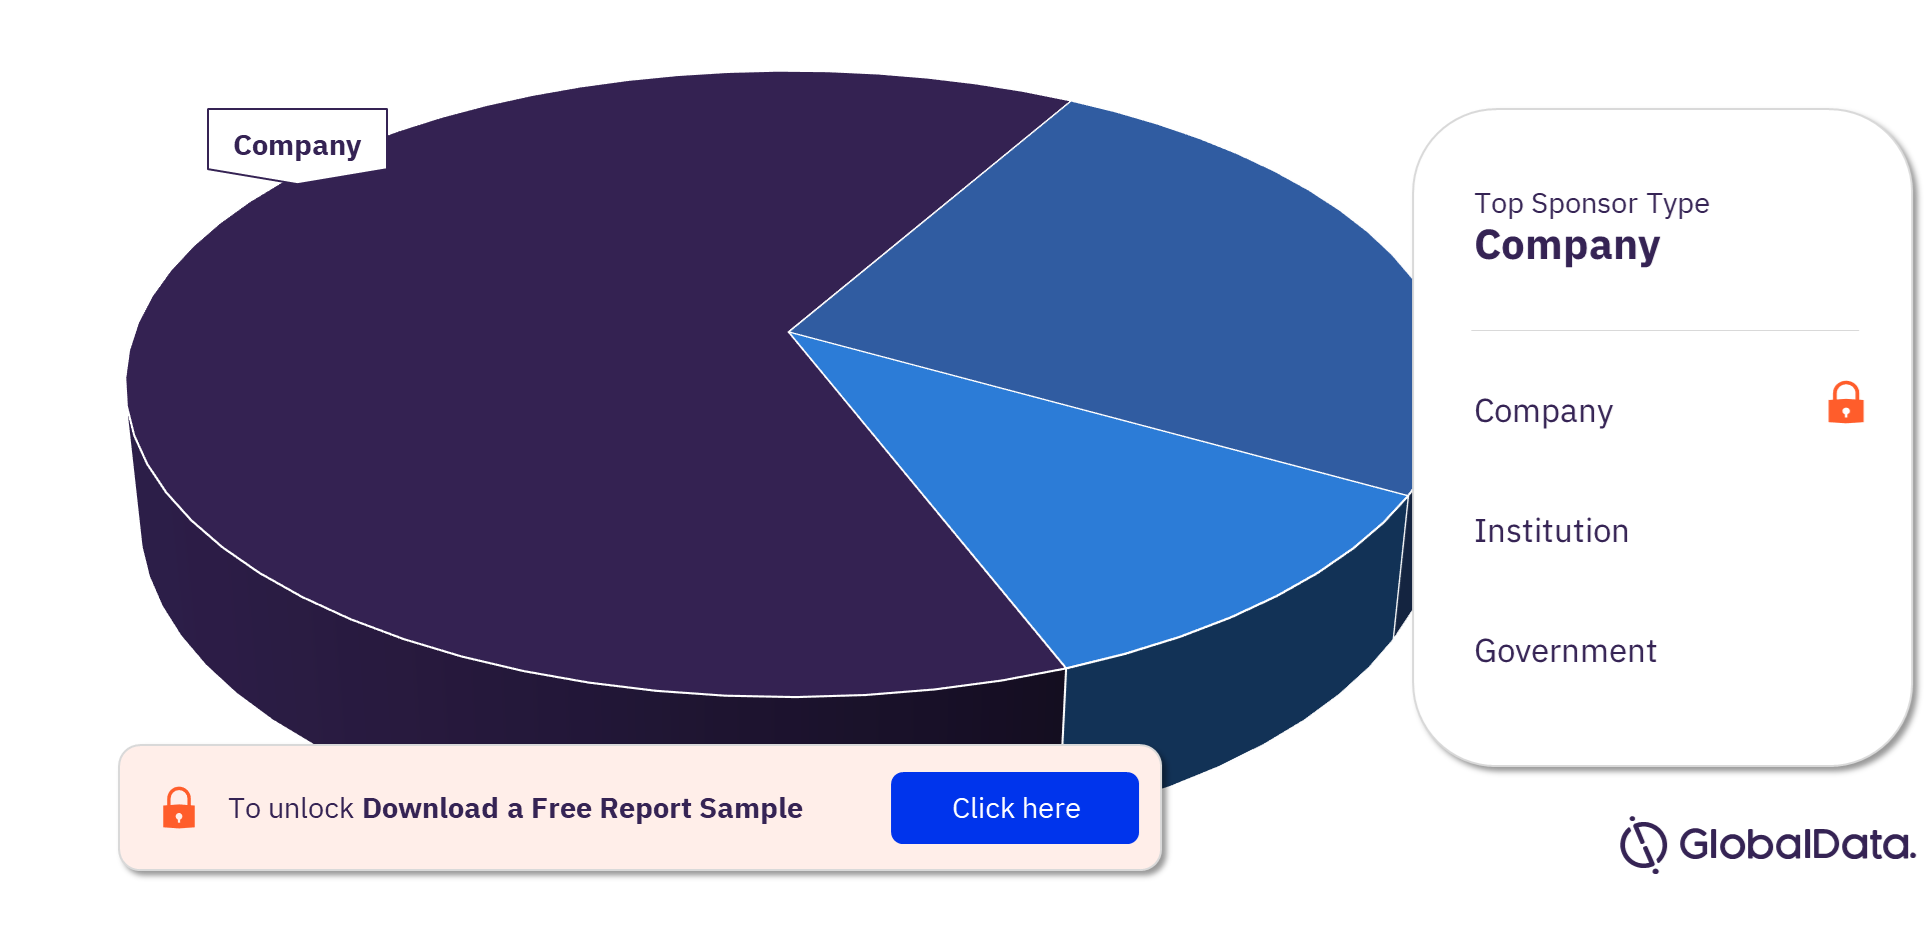 Psoriasis Clinical Trials Market Analysis by Sponsor Types, 2023 (%)